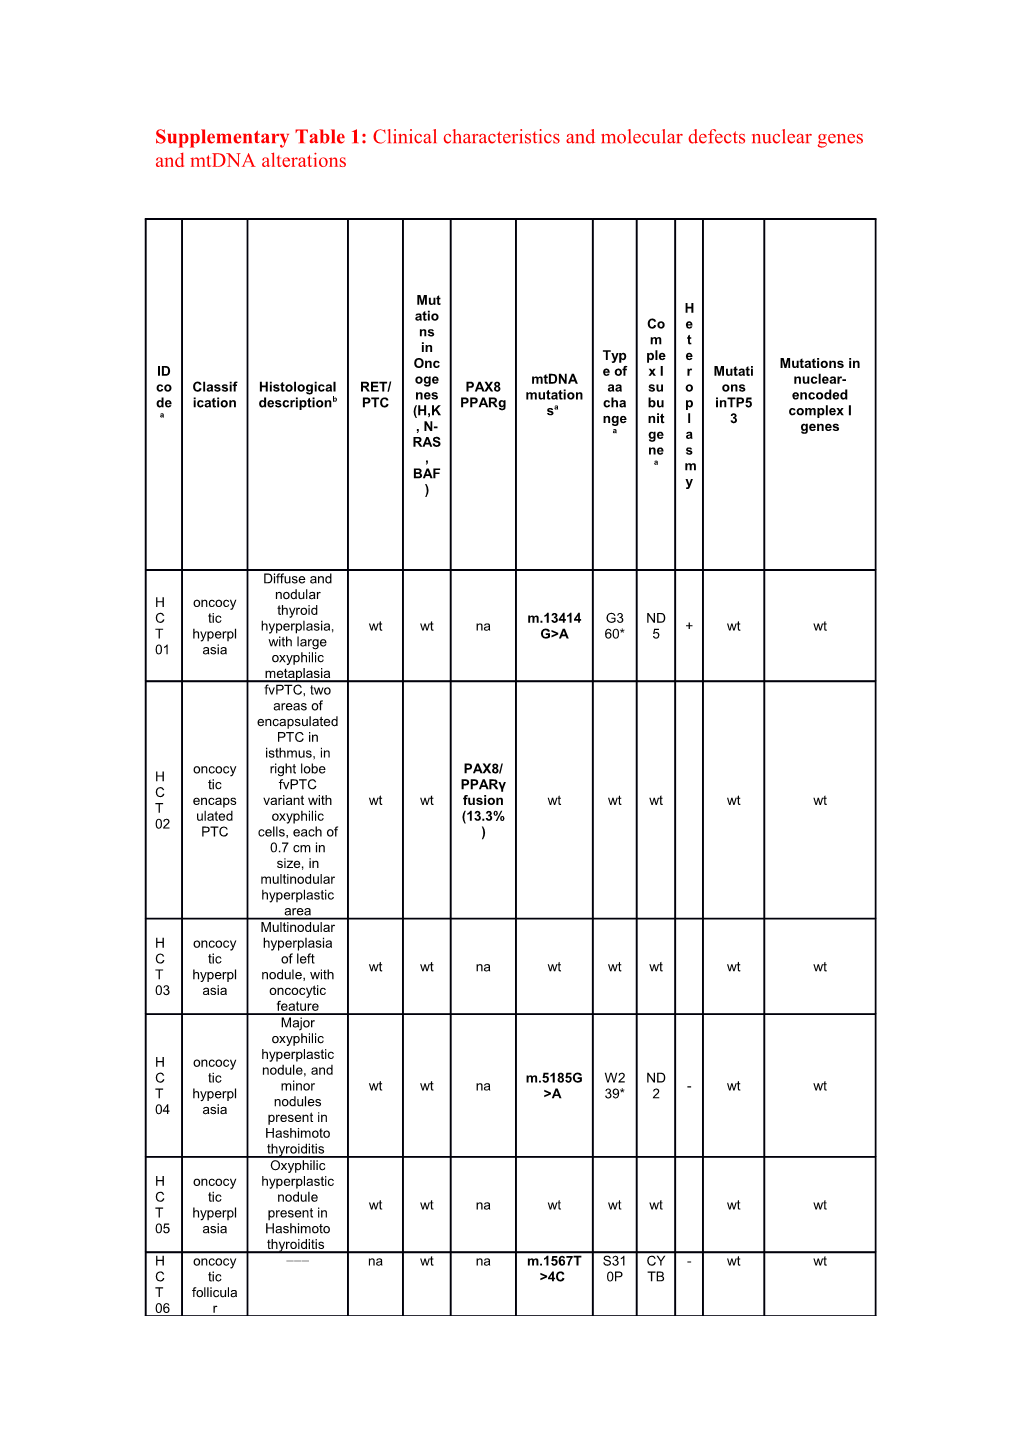 Supplementary Table 1: Clinical Characteristics and Molecular Defects Nuclear Genes And